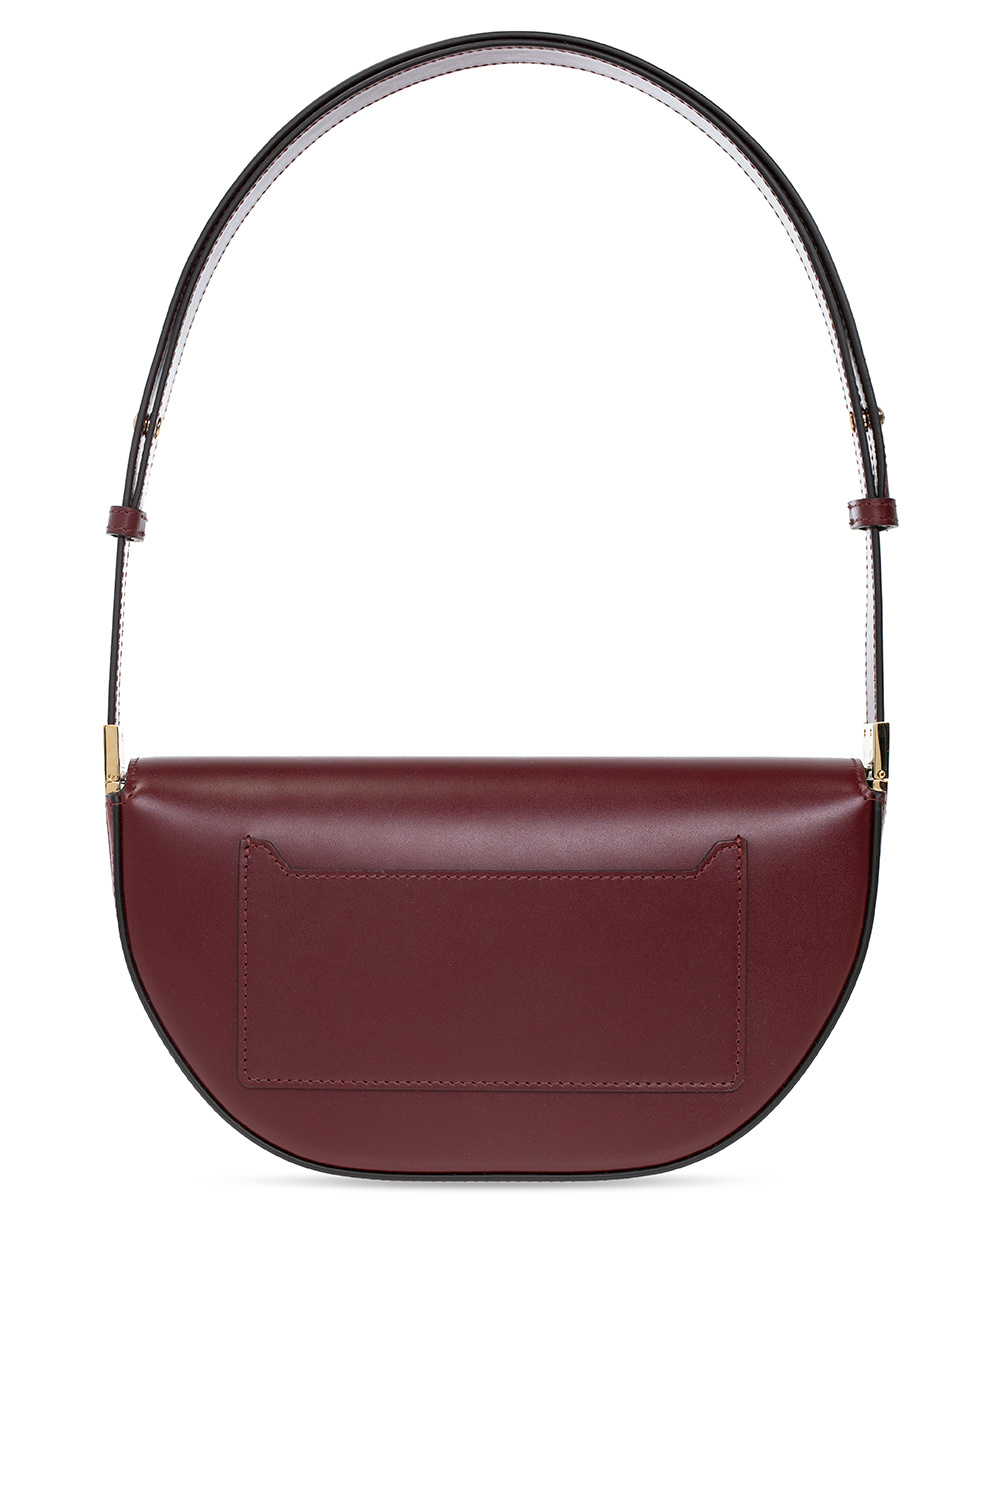 Burberry Pre-owned Women's Leather Shoulder Bag - Burgundy - One Size